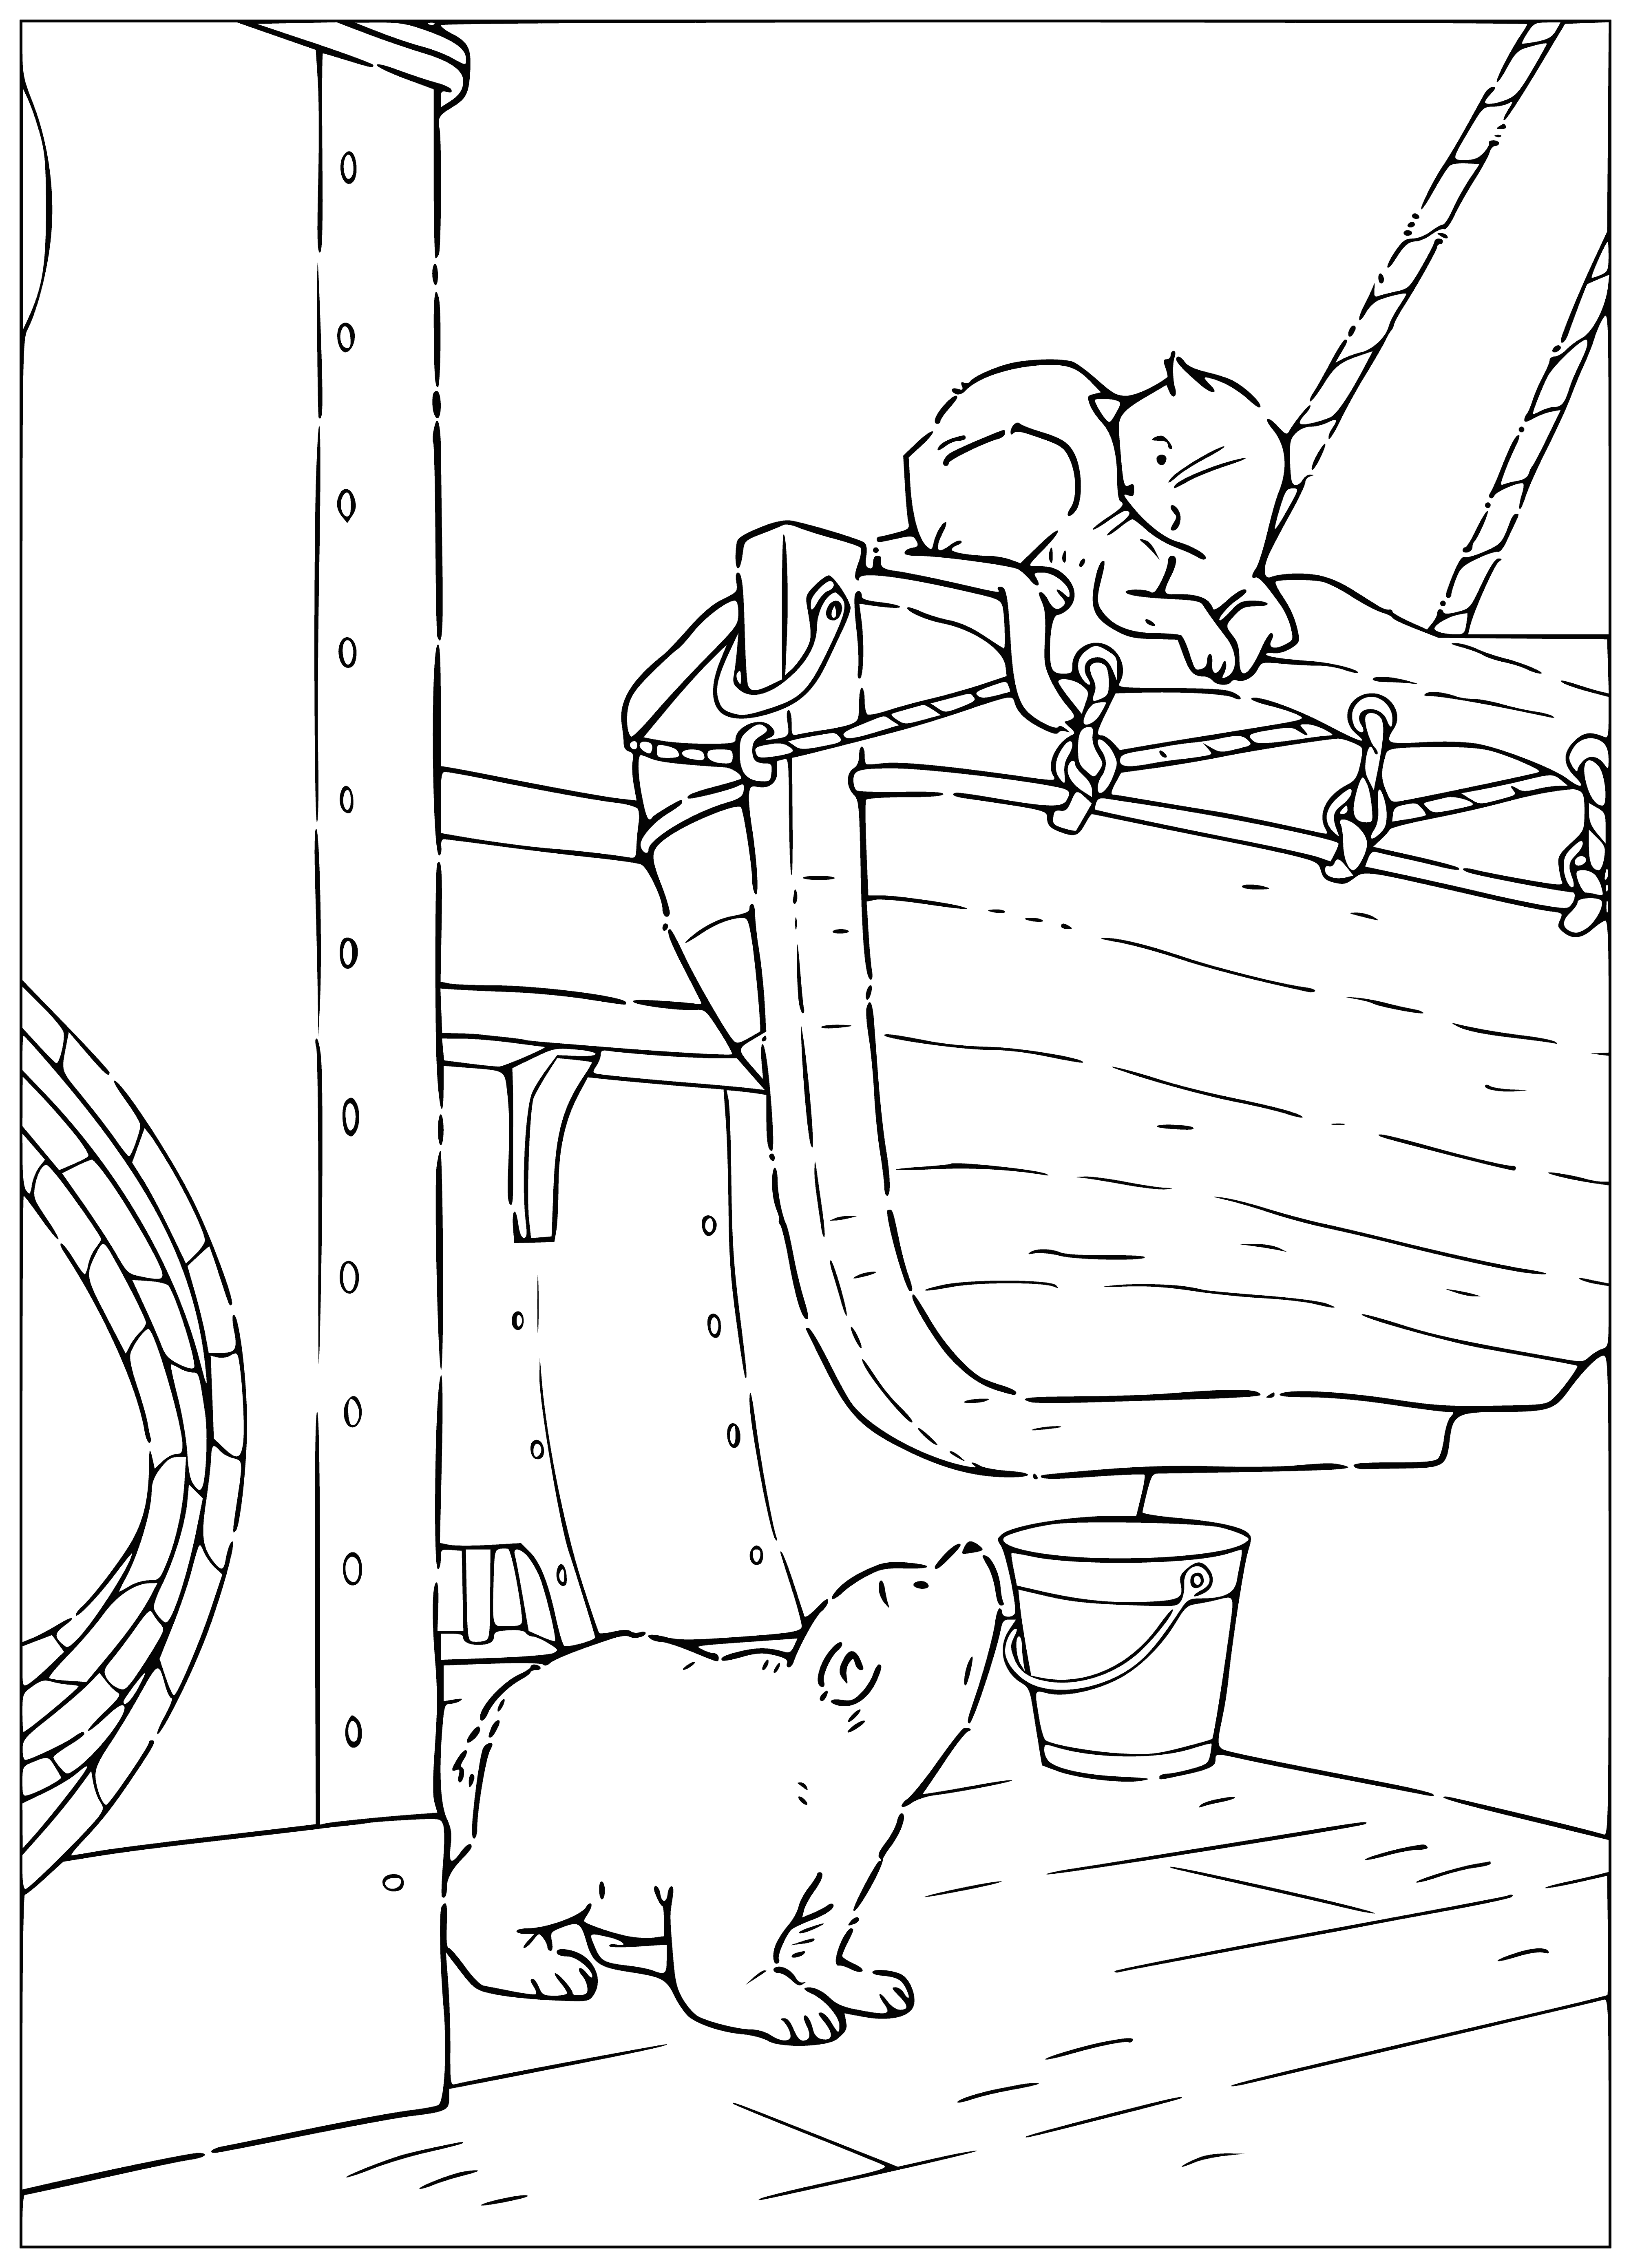 Lars on the ship coloring page